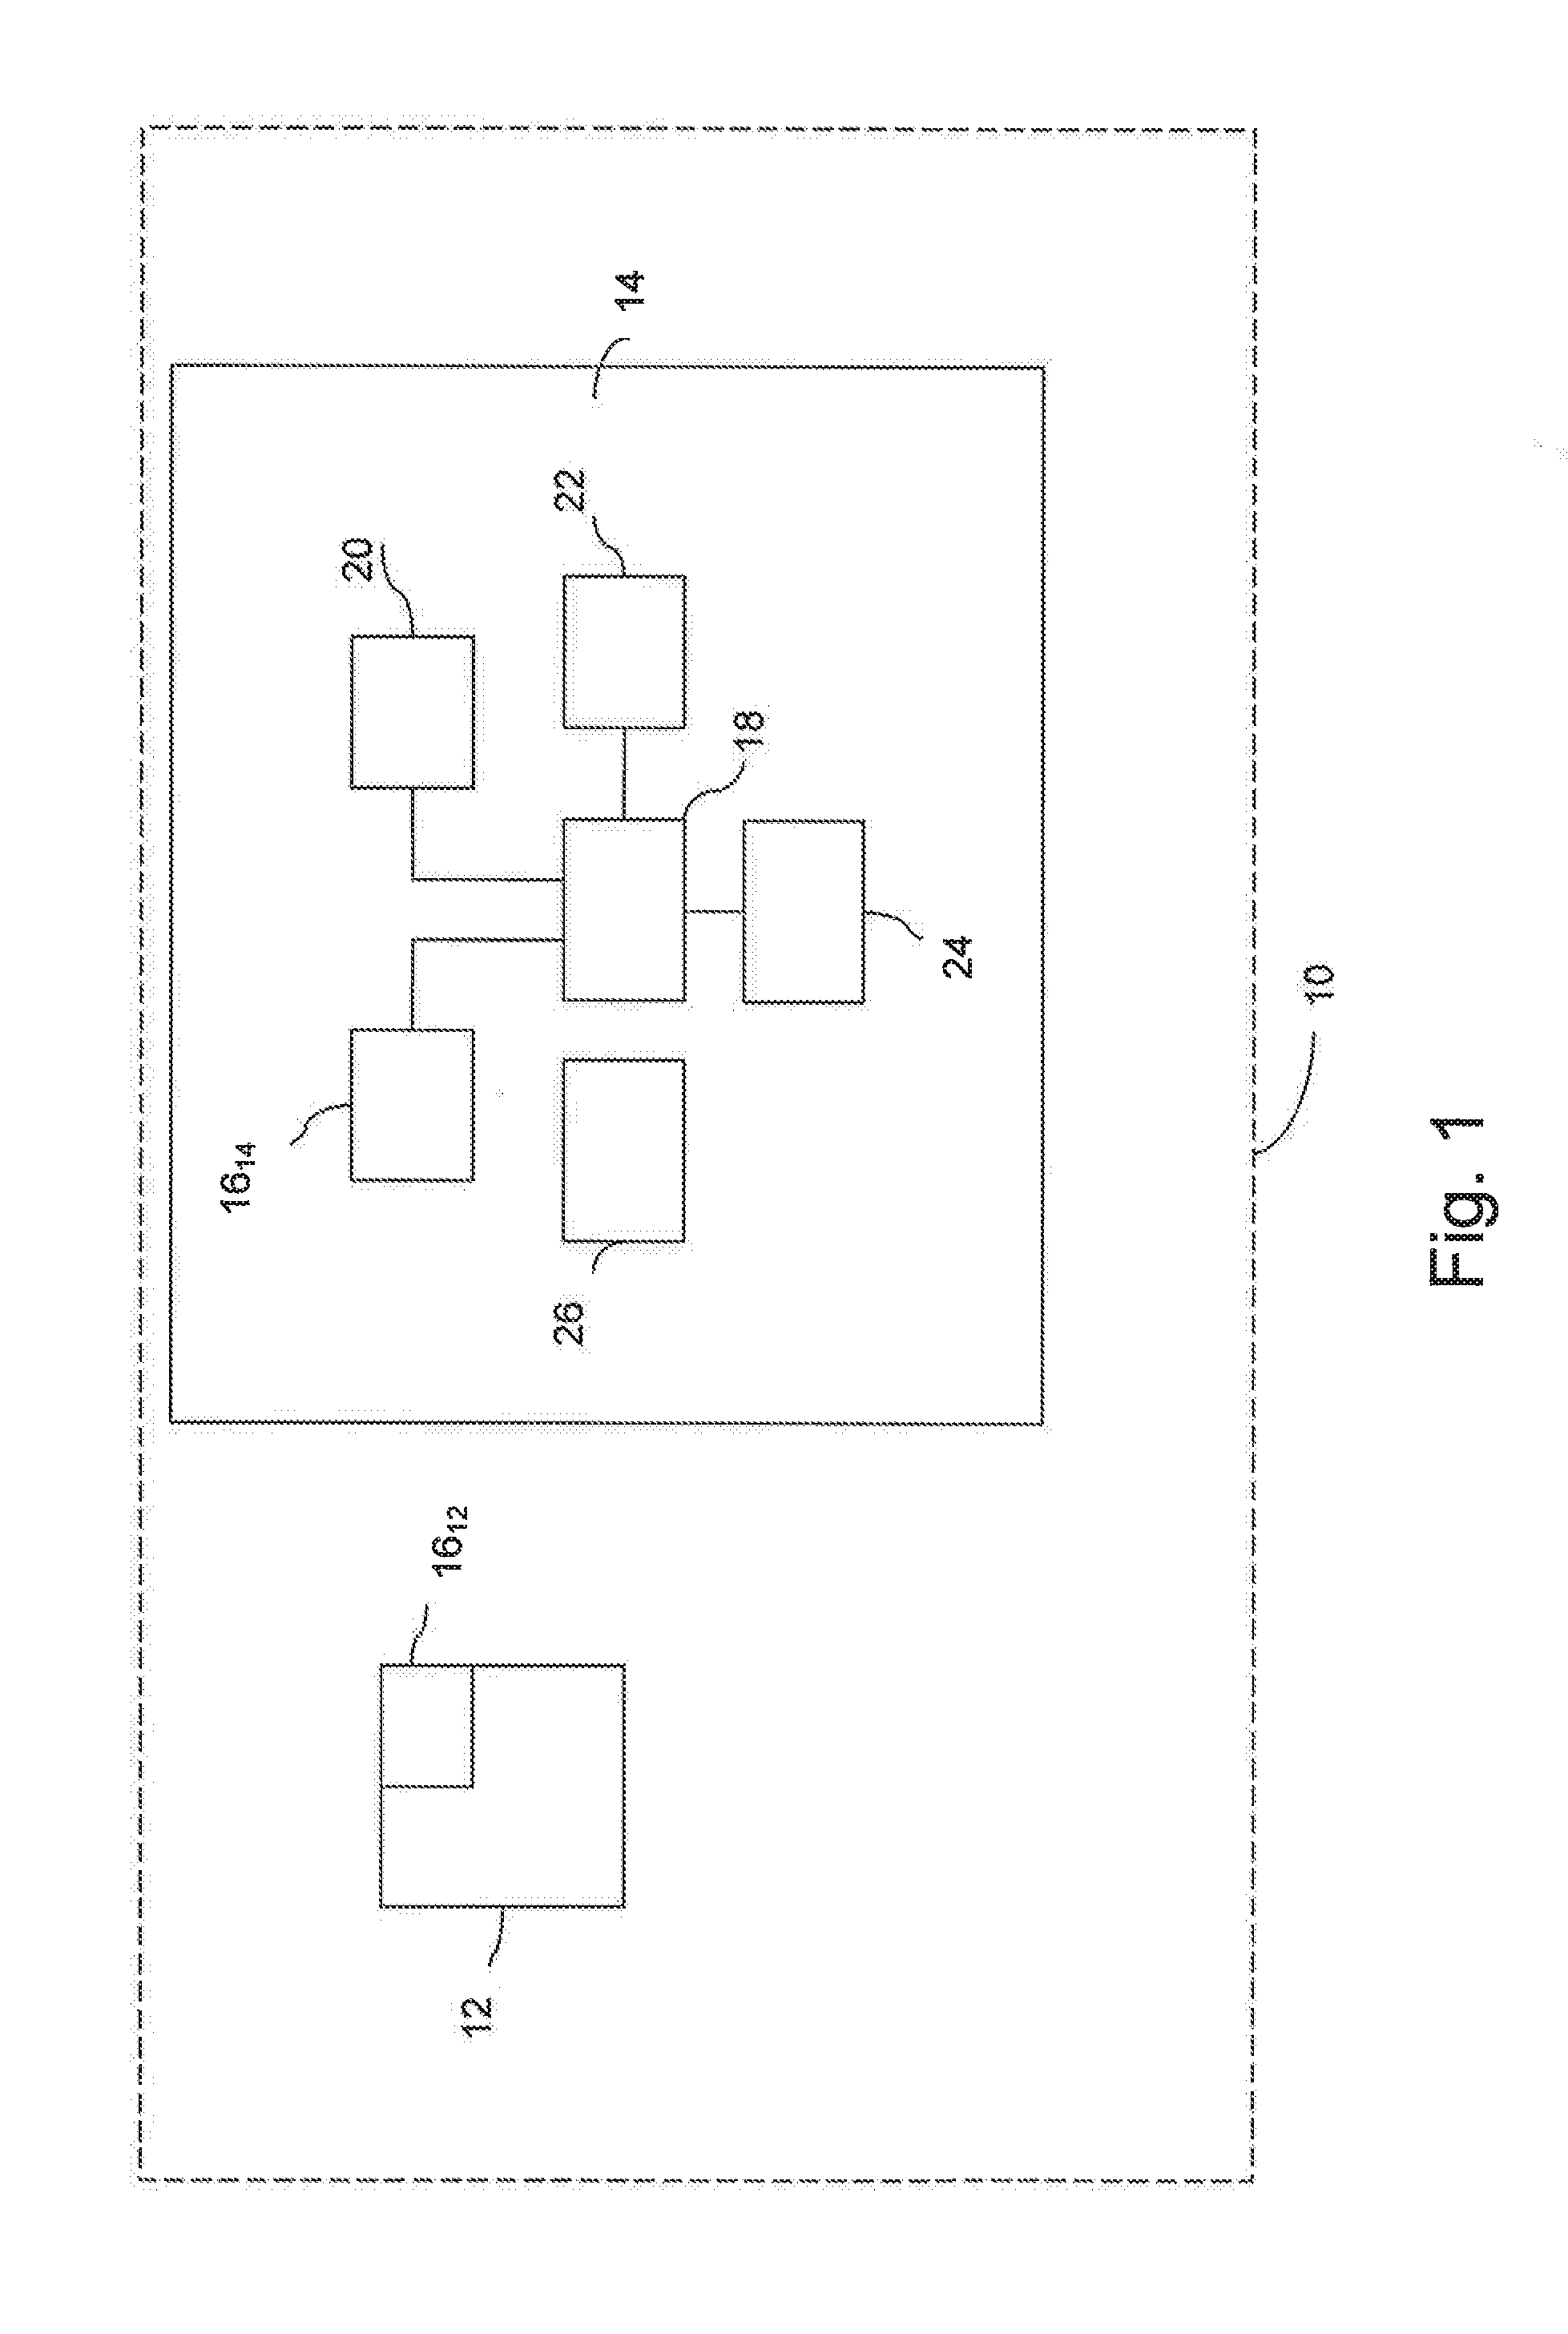 System and Method for Determining a Time When the Blood Alcohol Concentration Has Passed a Threshold Level